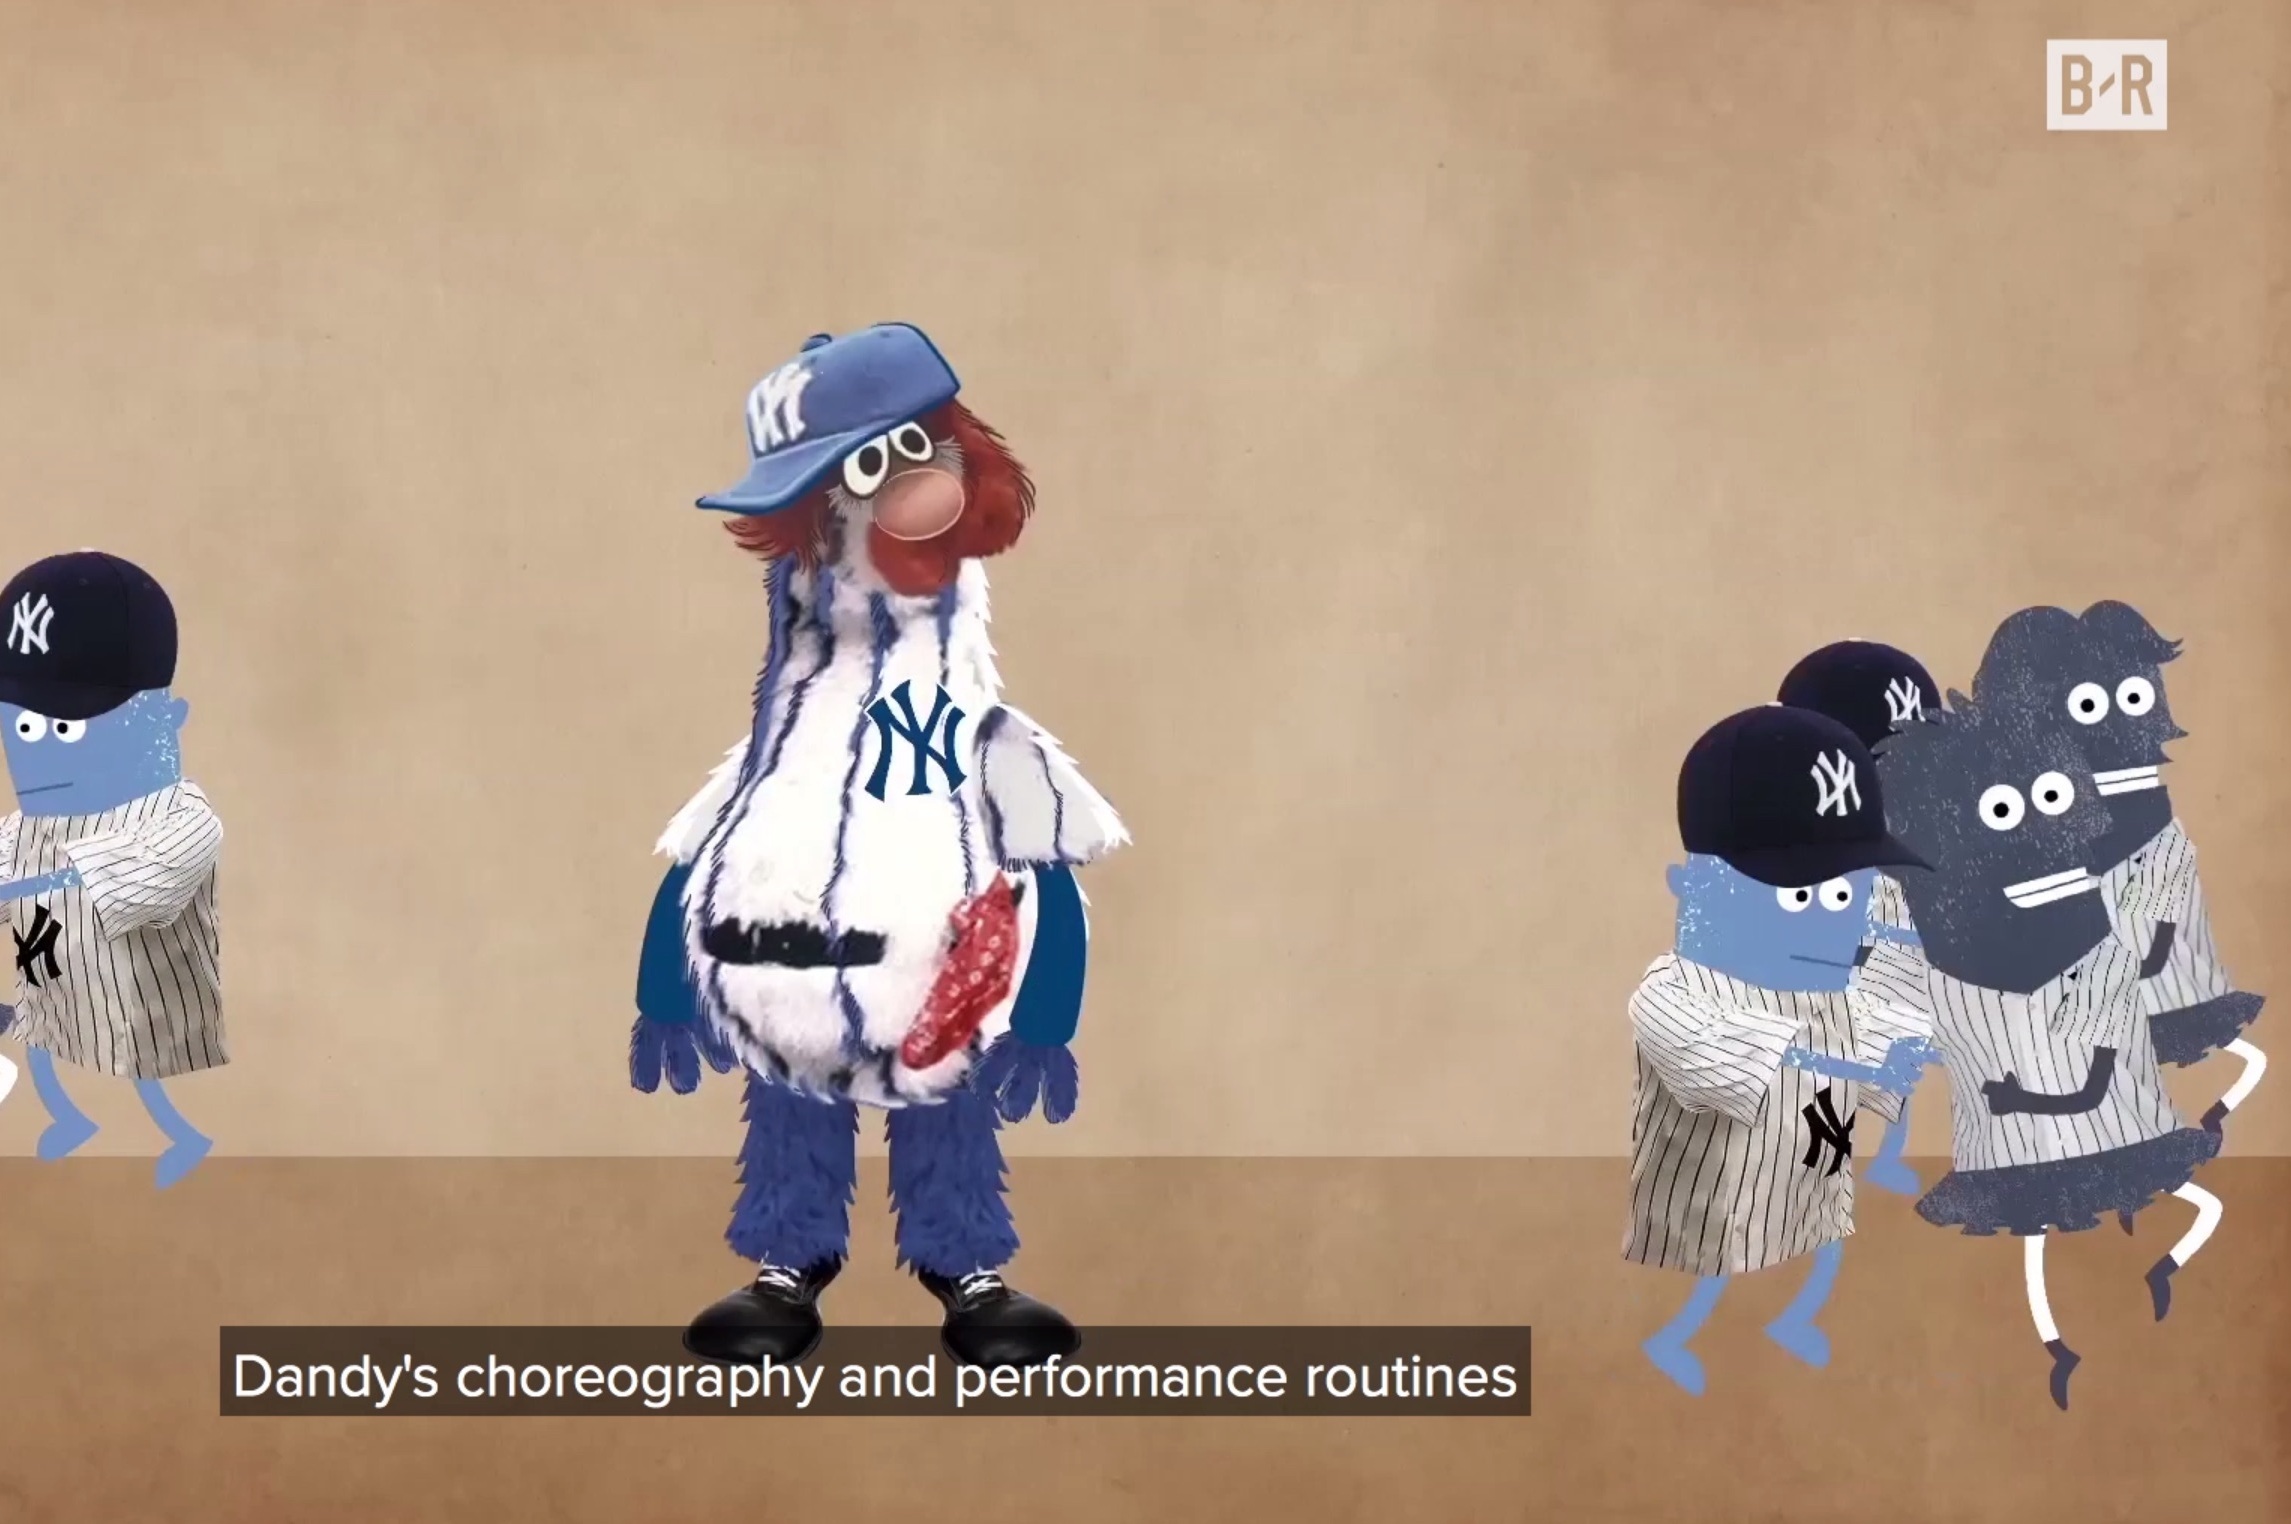 A look back at 'Dandy' — the forgotten Yankees mascot